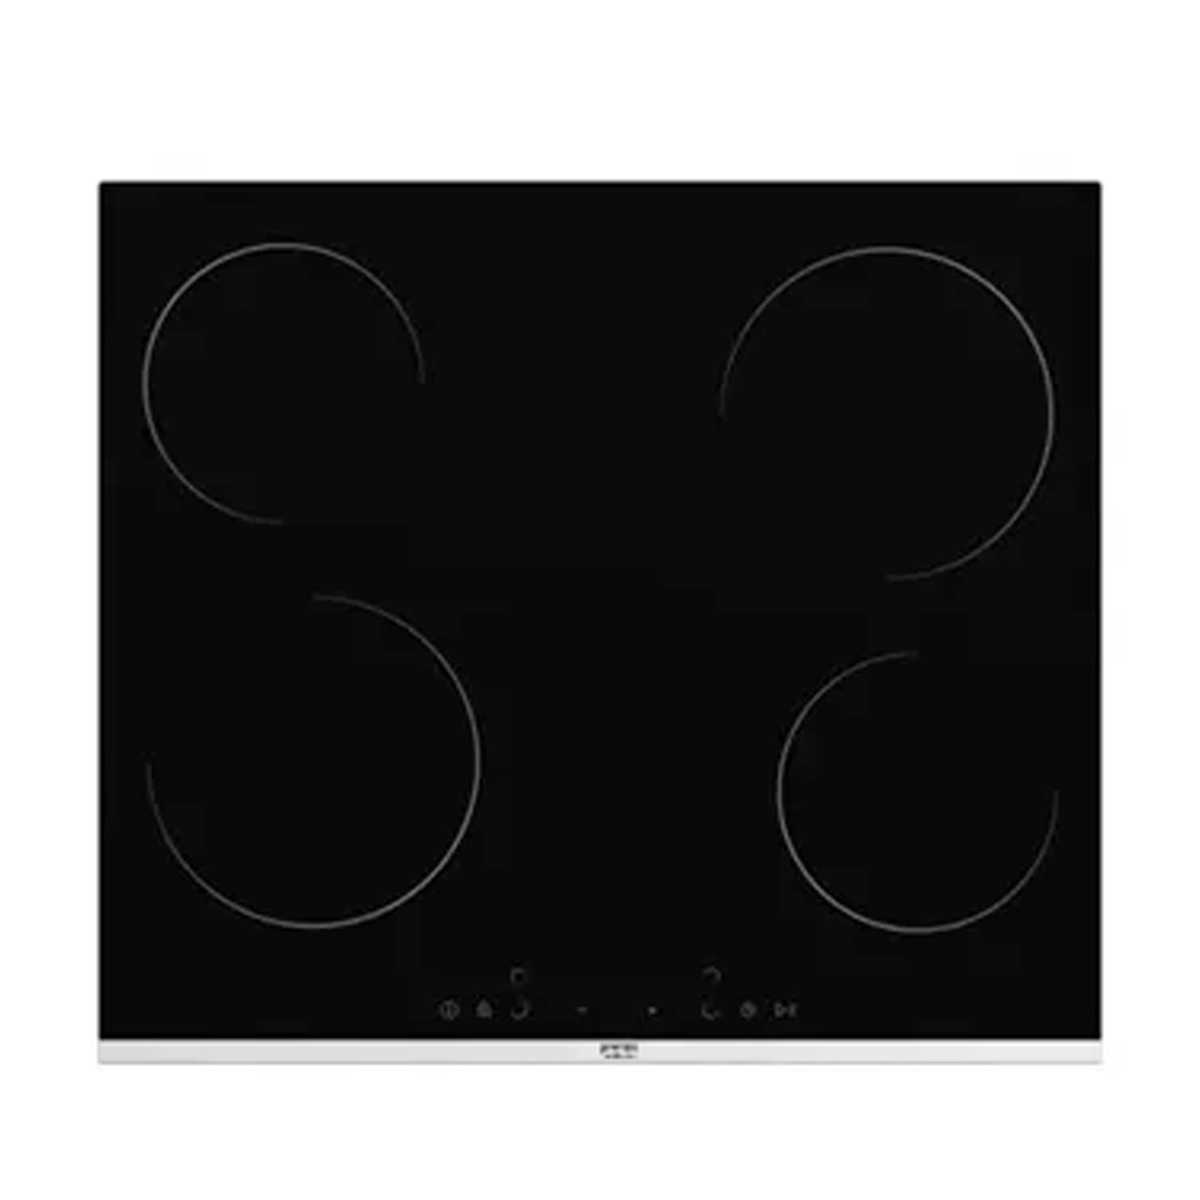 Generalco Built-in Electric Cooking Hob, 4 Ceramic Hobs, 60 cm, Black, MS261